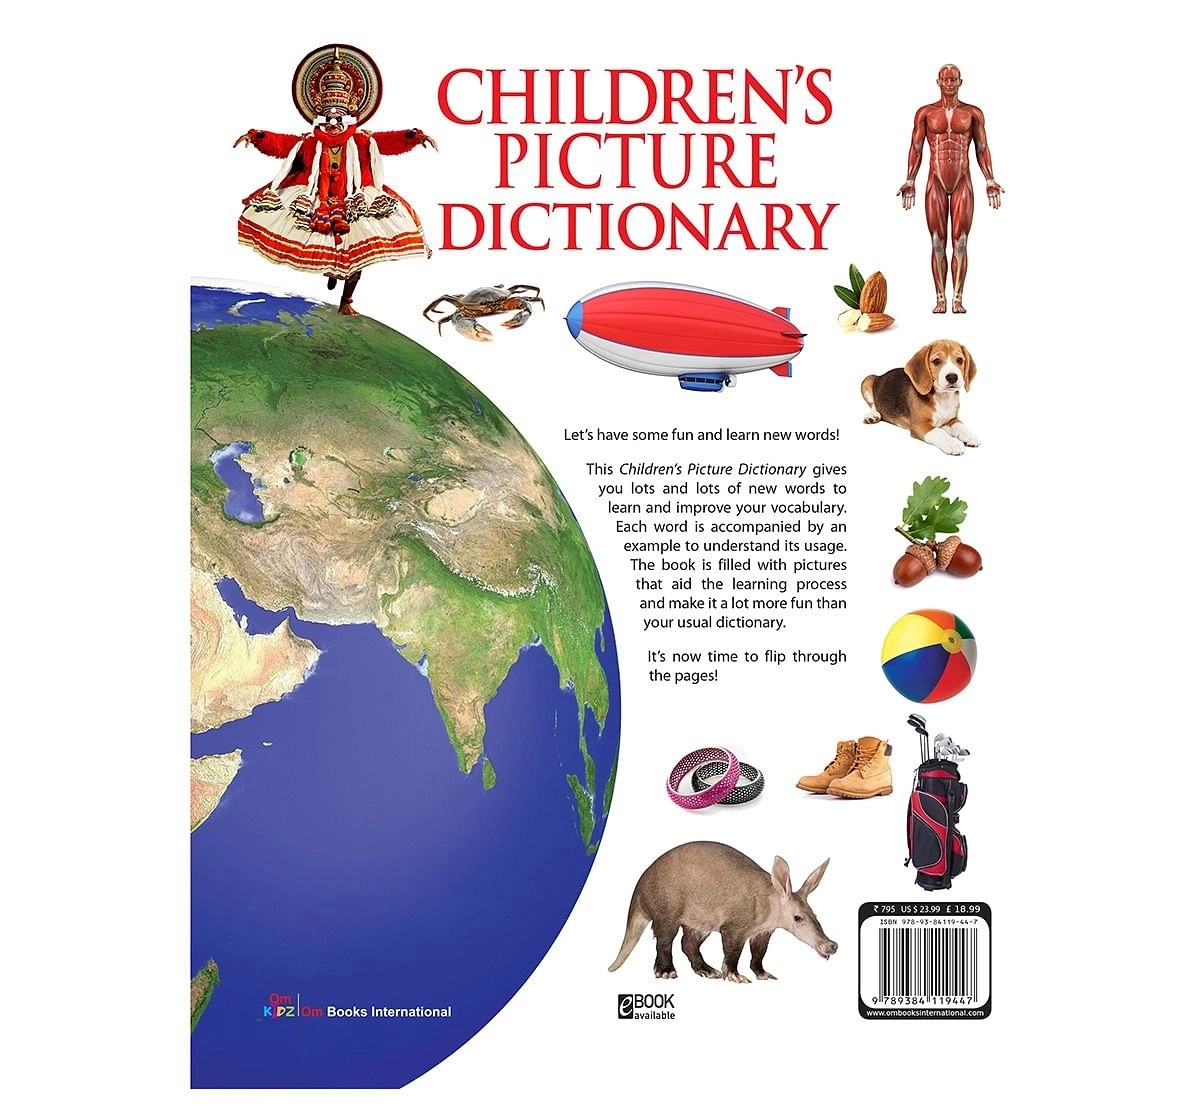 Om Books Children's Picture Dictionary, 795 Pages, Hardback